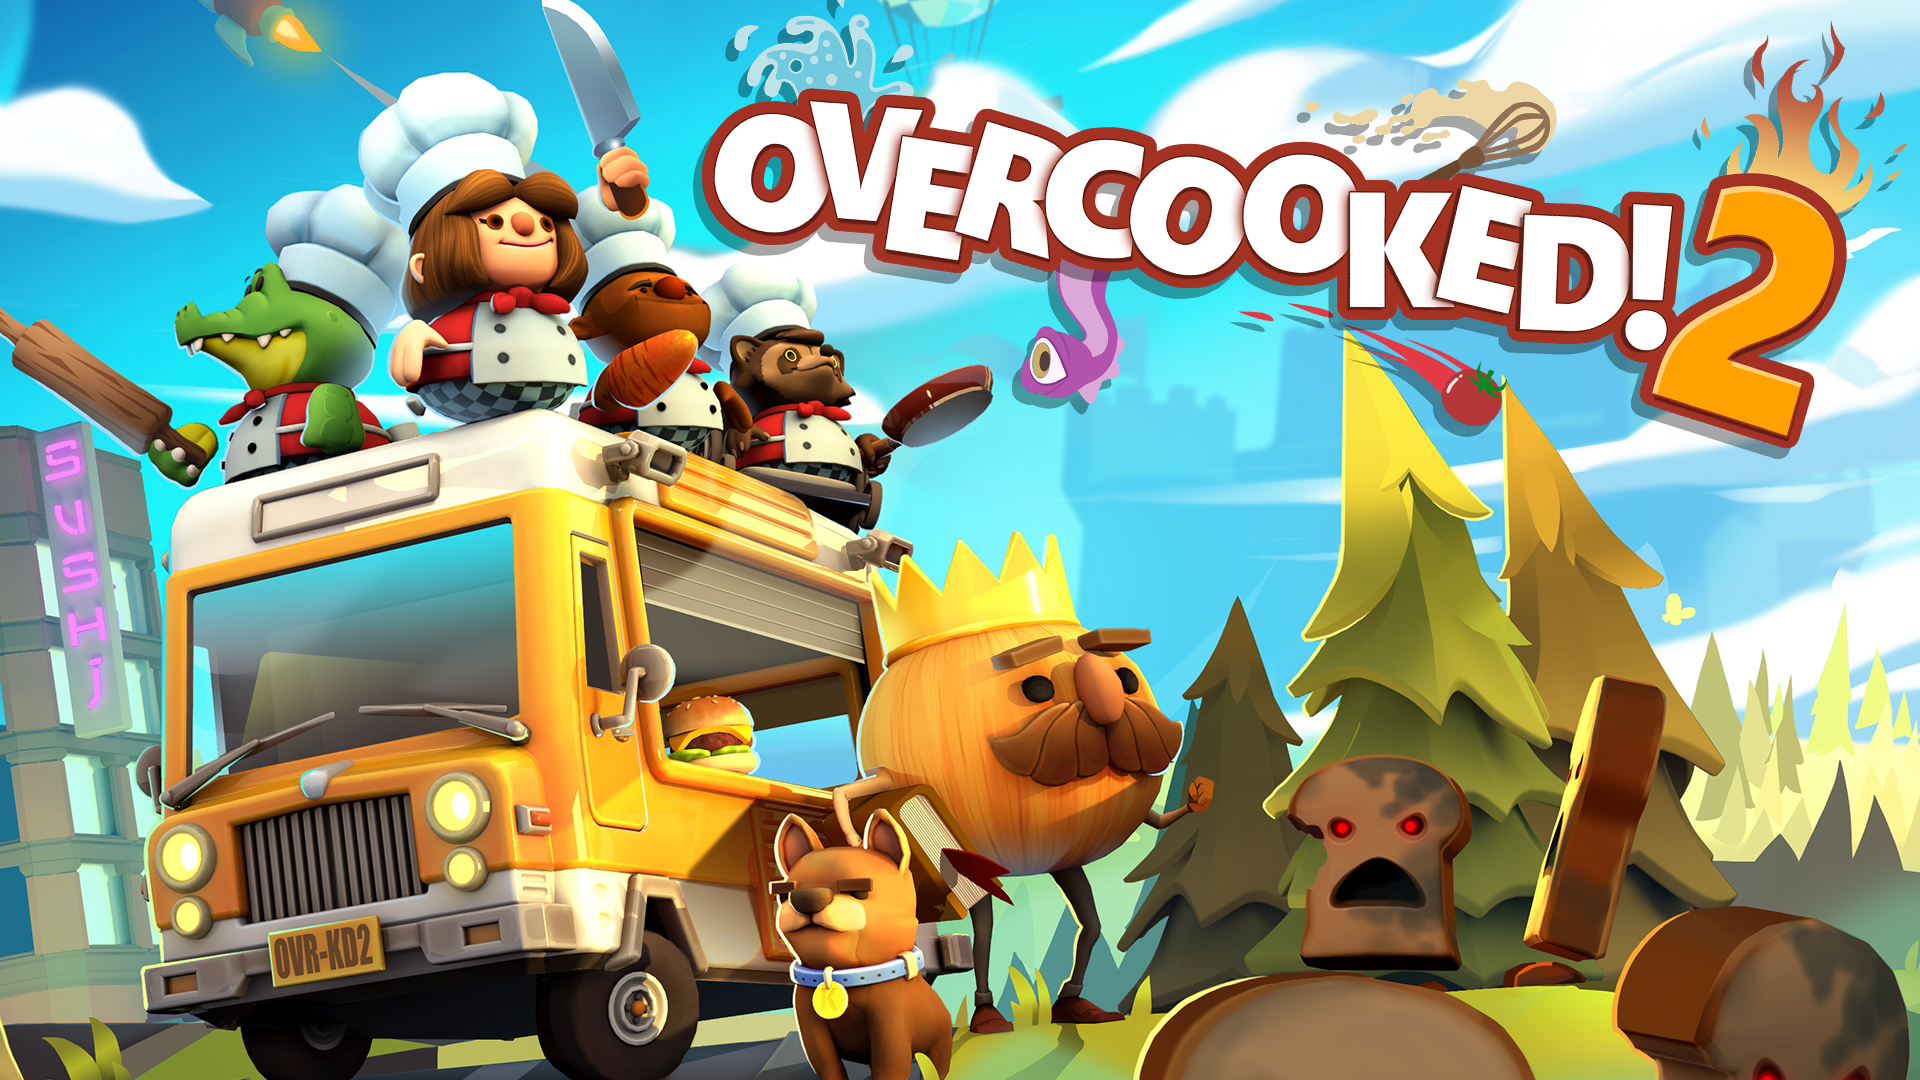 2 Overcooked 2 HD Wallpapers | Background Images - Wallpaper Abyss